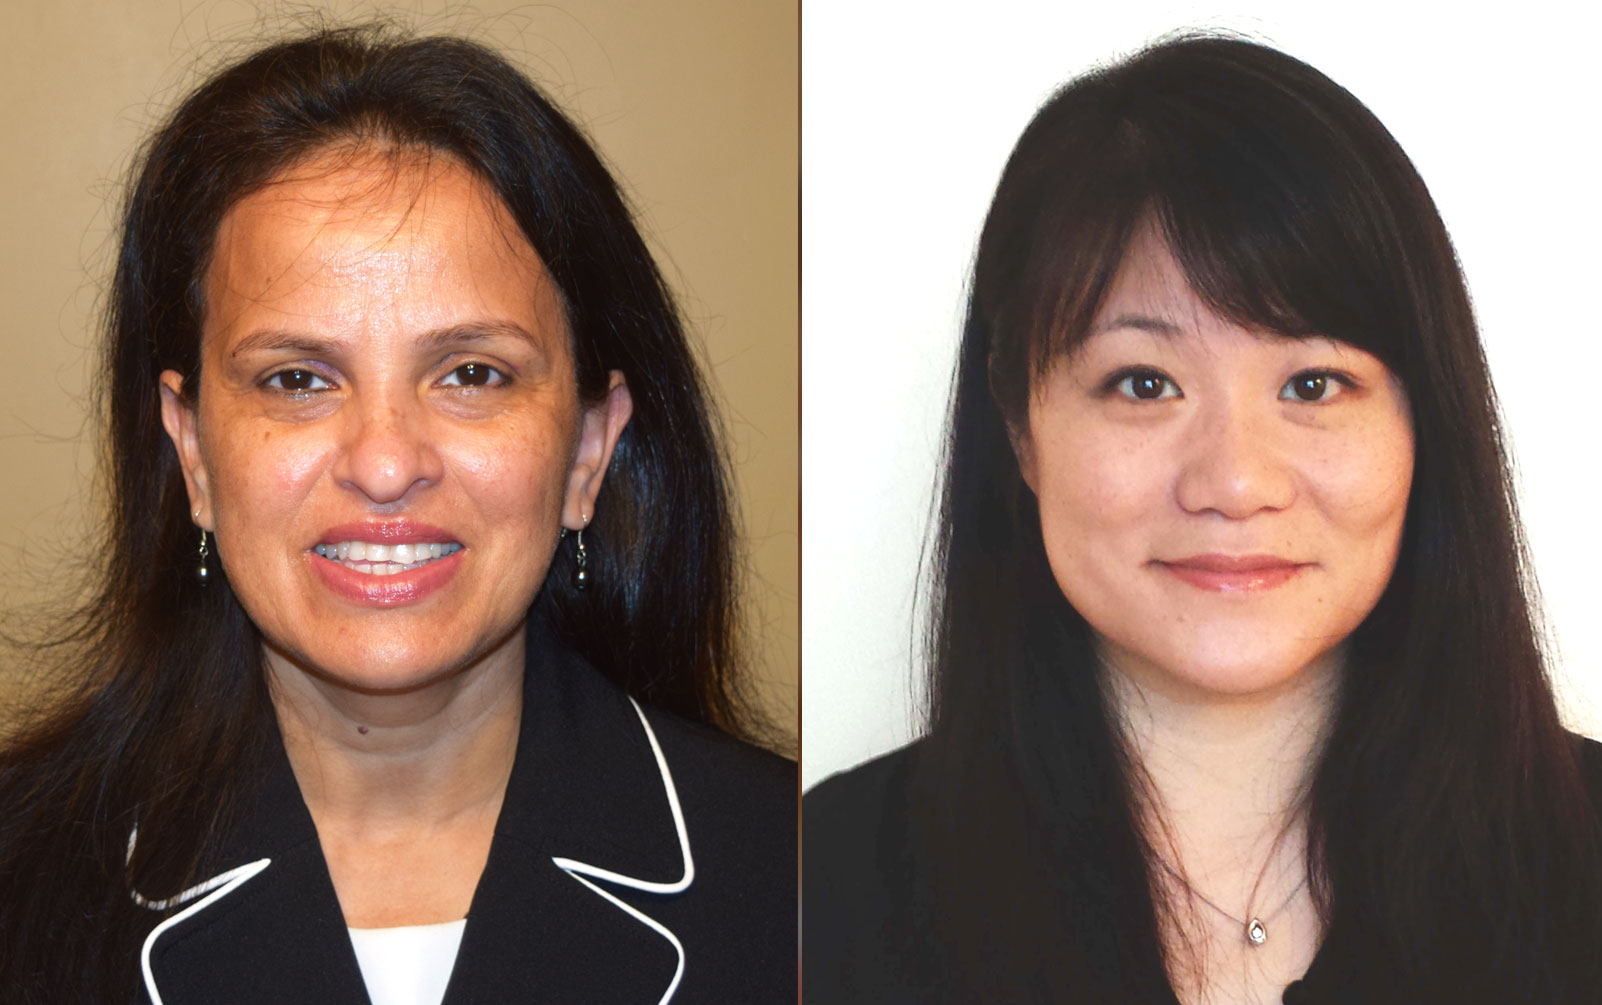 FDA Corner - Interview with Reena Philip, PHD, and Eunice Lee, PHD